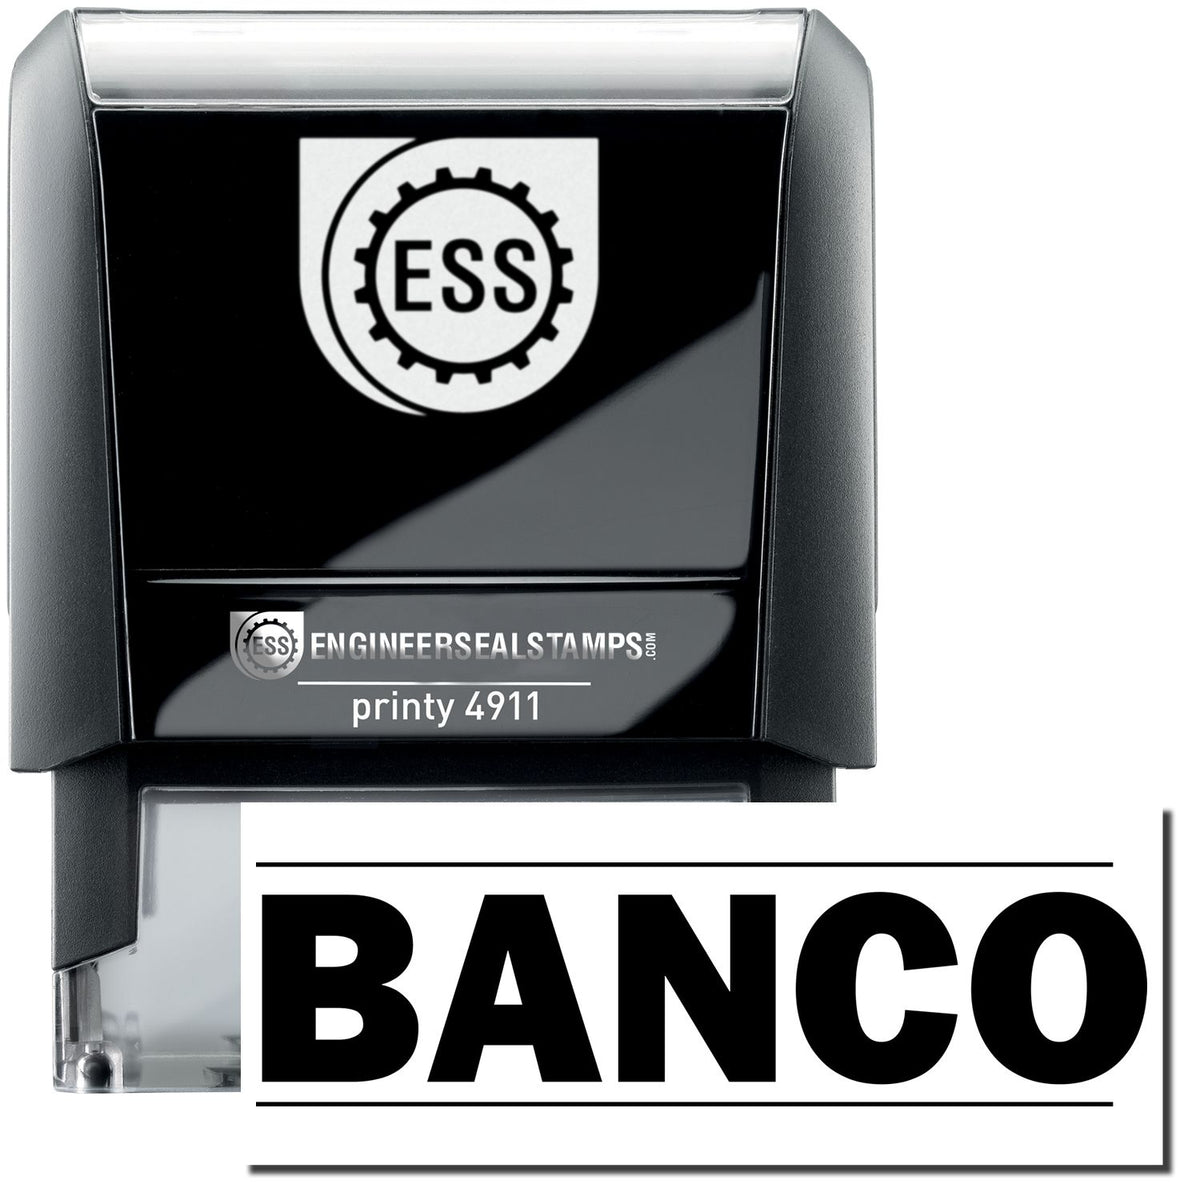 A self-inking stamp with a stamped image showing how the text &quot;BANCO&quot; in bold font (with a line both above and below the text) is displayed after stamping.